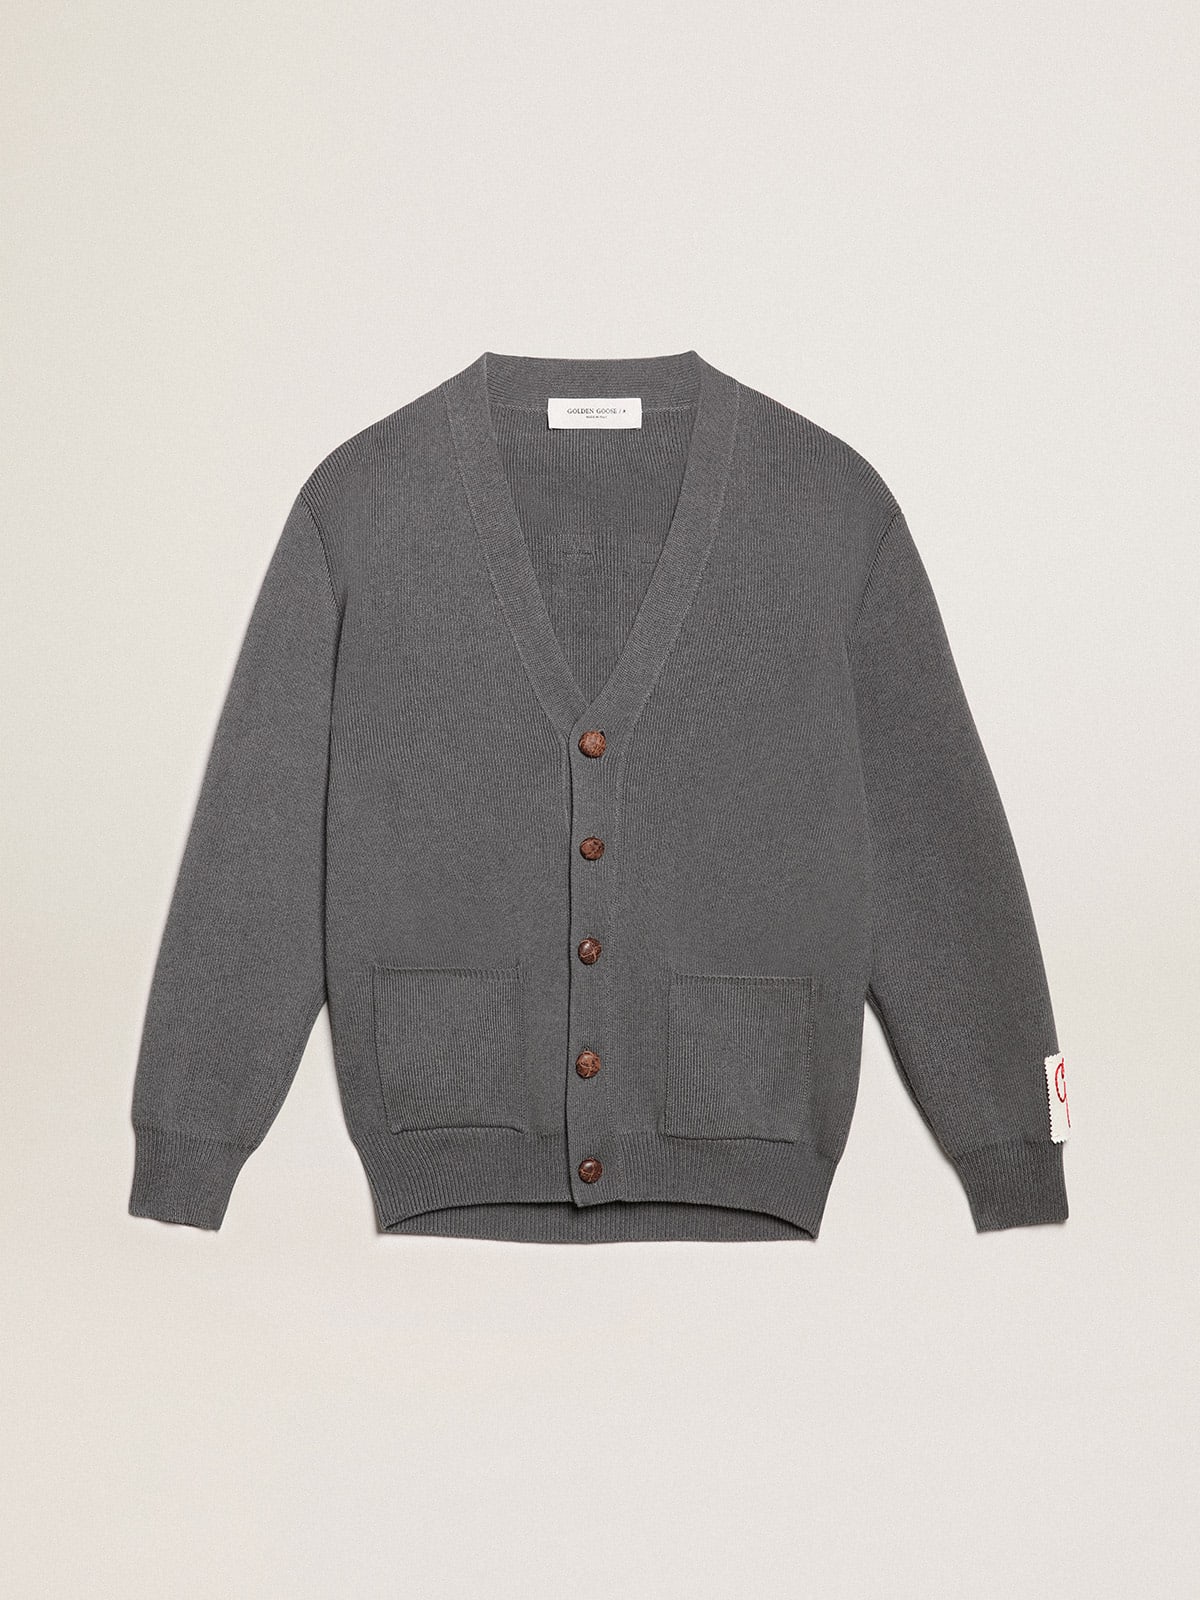 Women's cardigan in gray melange cotton with logo on the back